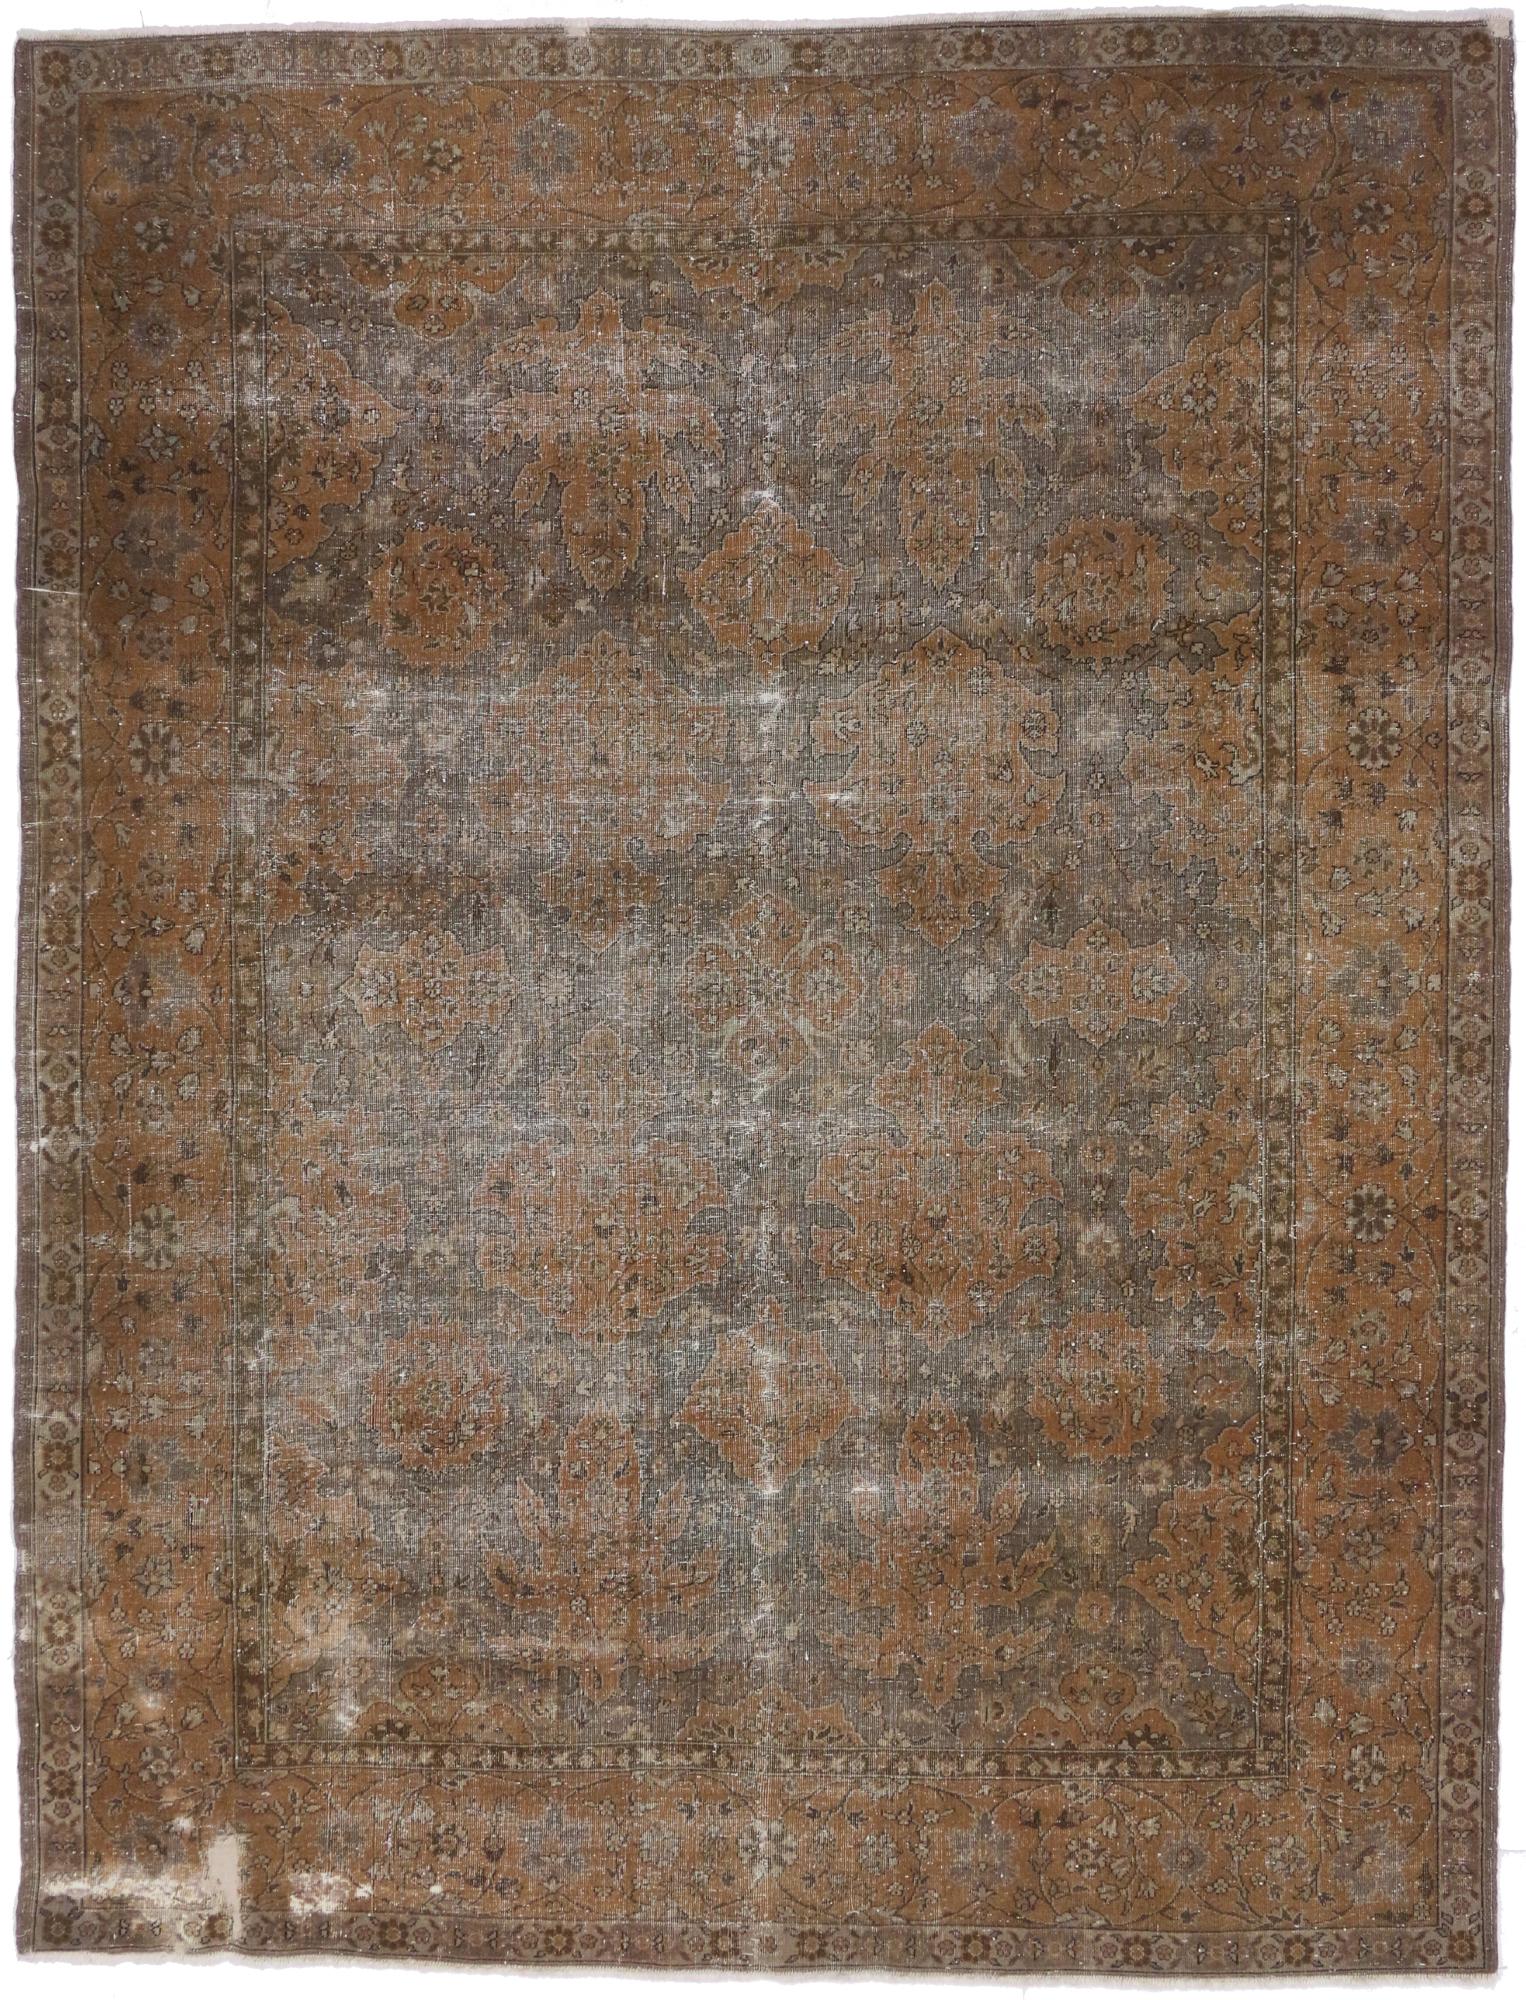 Distressed Antique Turkish Sparta Area Rug with Industrial Machine Age Style 5